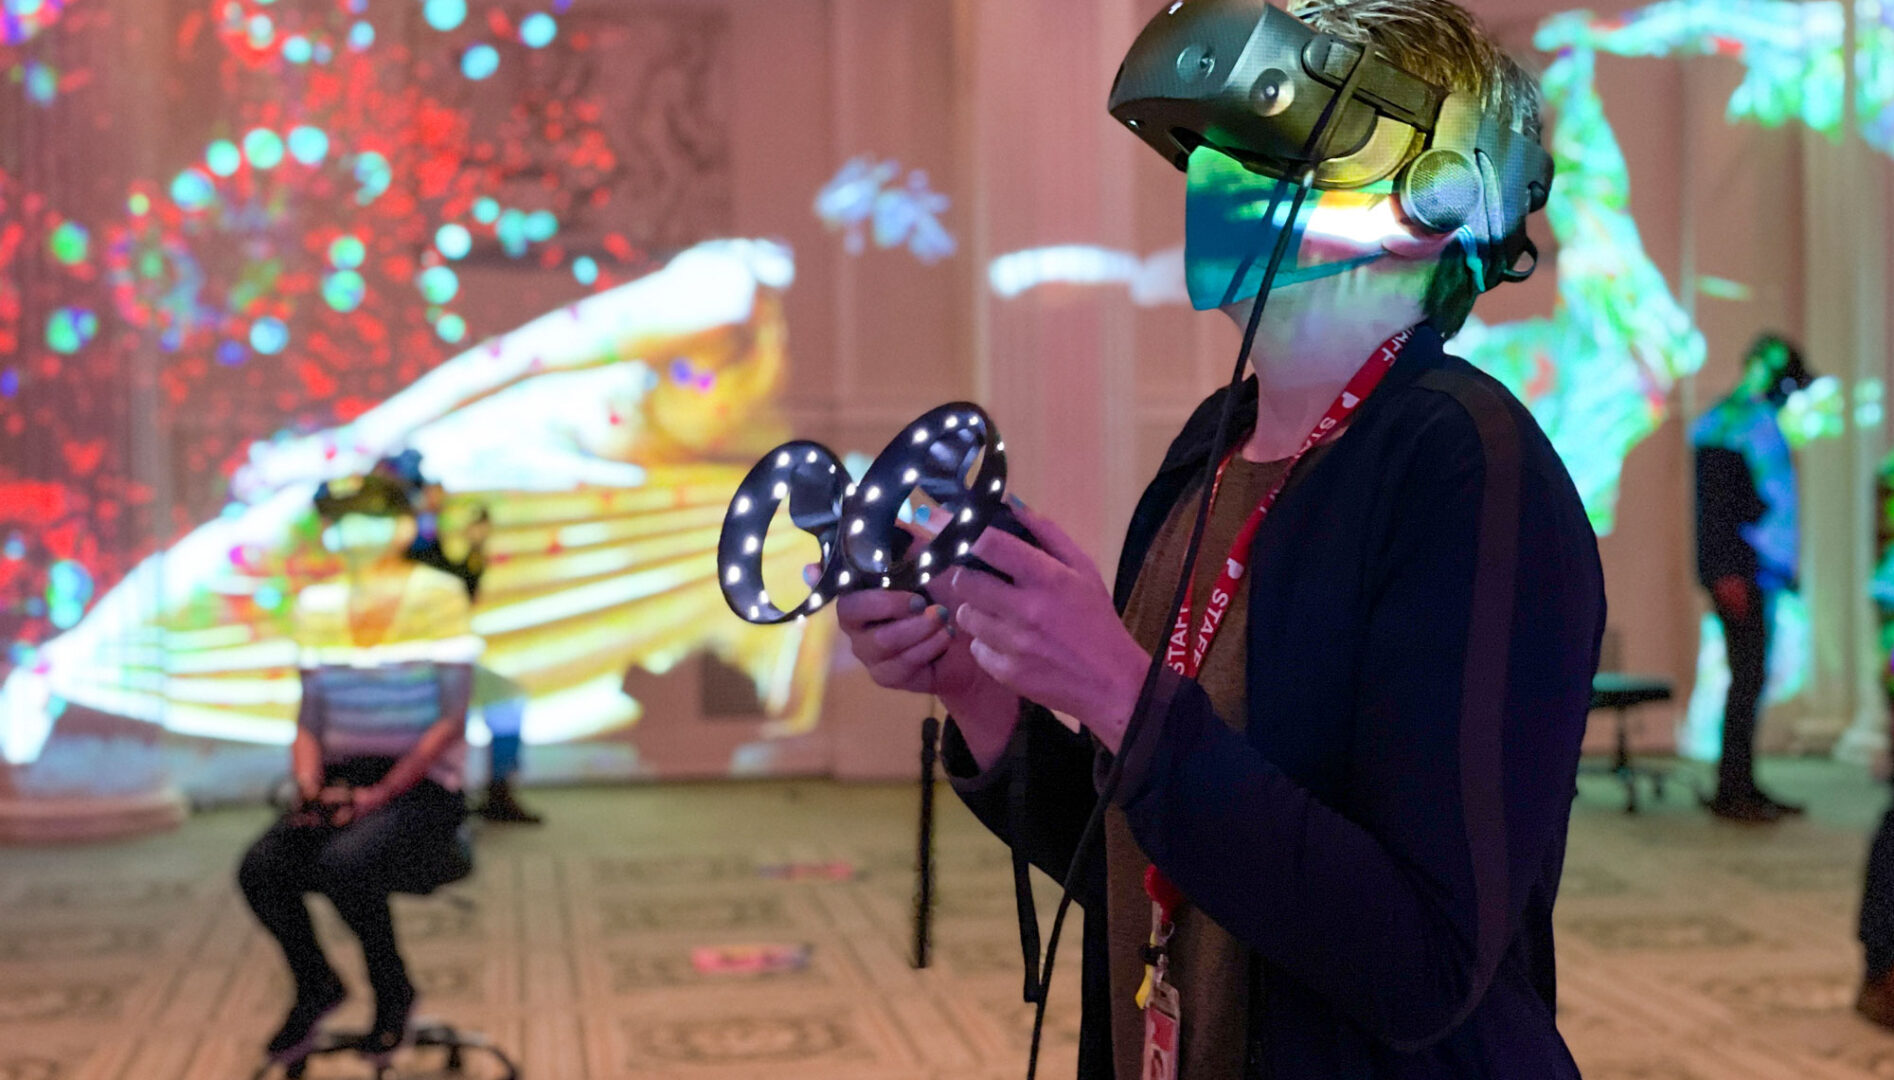 A person in the Sunken Ballroom wearing a VR headset and hand controls. Other people doing virtual reality and colored lights are in the background.